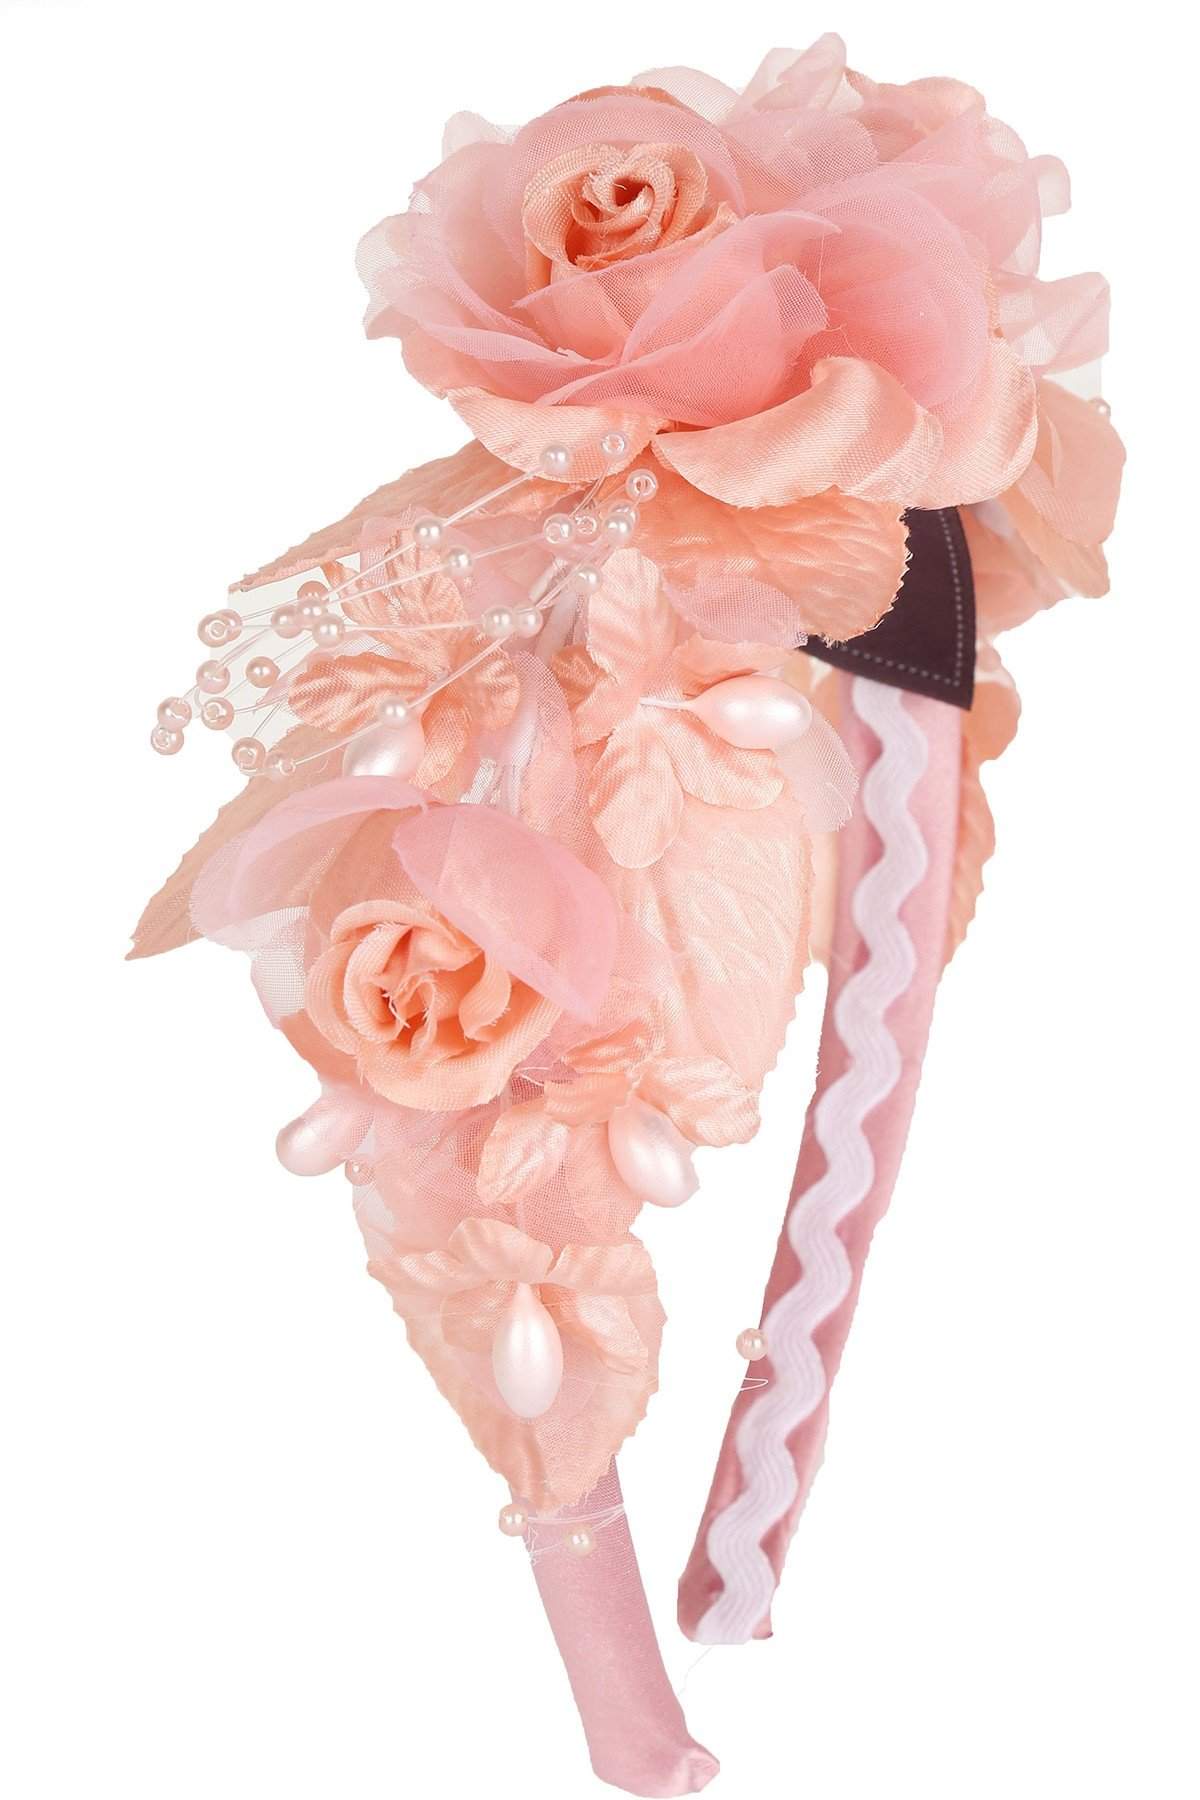 Flower Headband-Kid's Dream-1_2,3_4,5_6,7_8,big_girl,color_White,fabric_Satin,little_girl,size_02,size_04,size_06,size_08,size_10,size_12,size_14